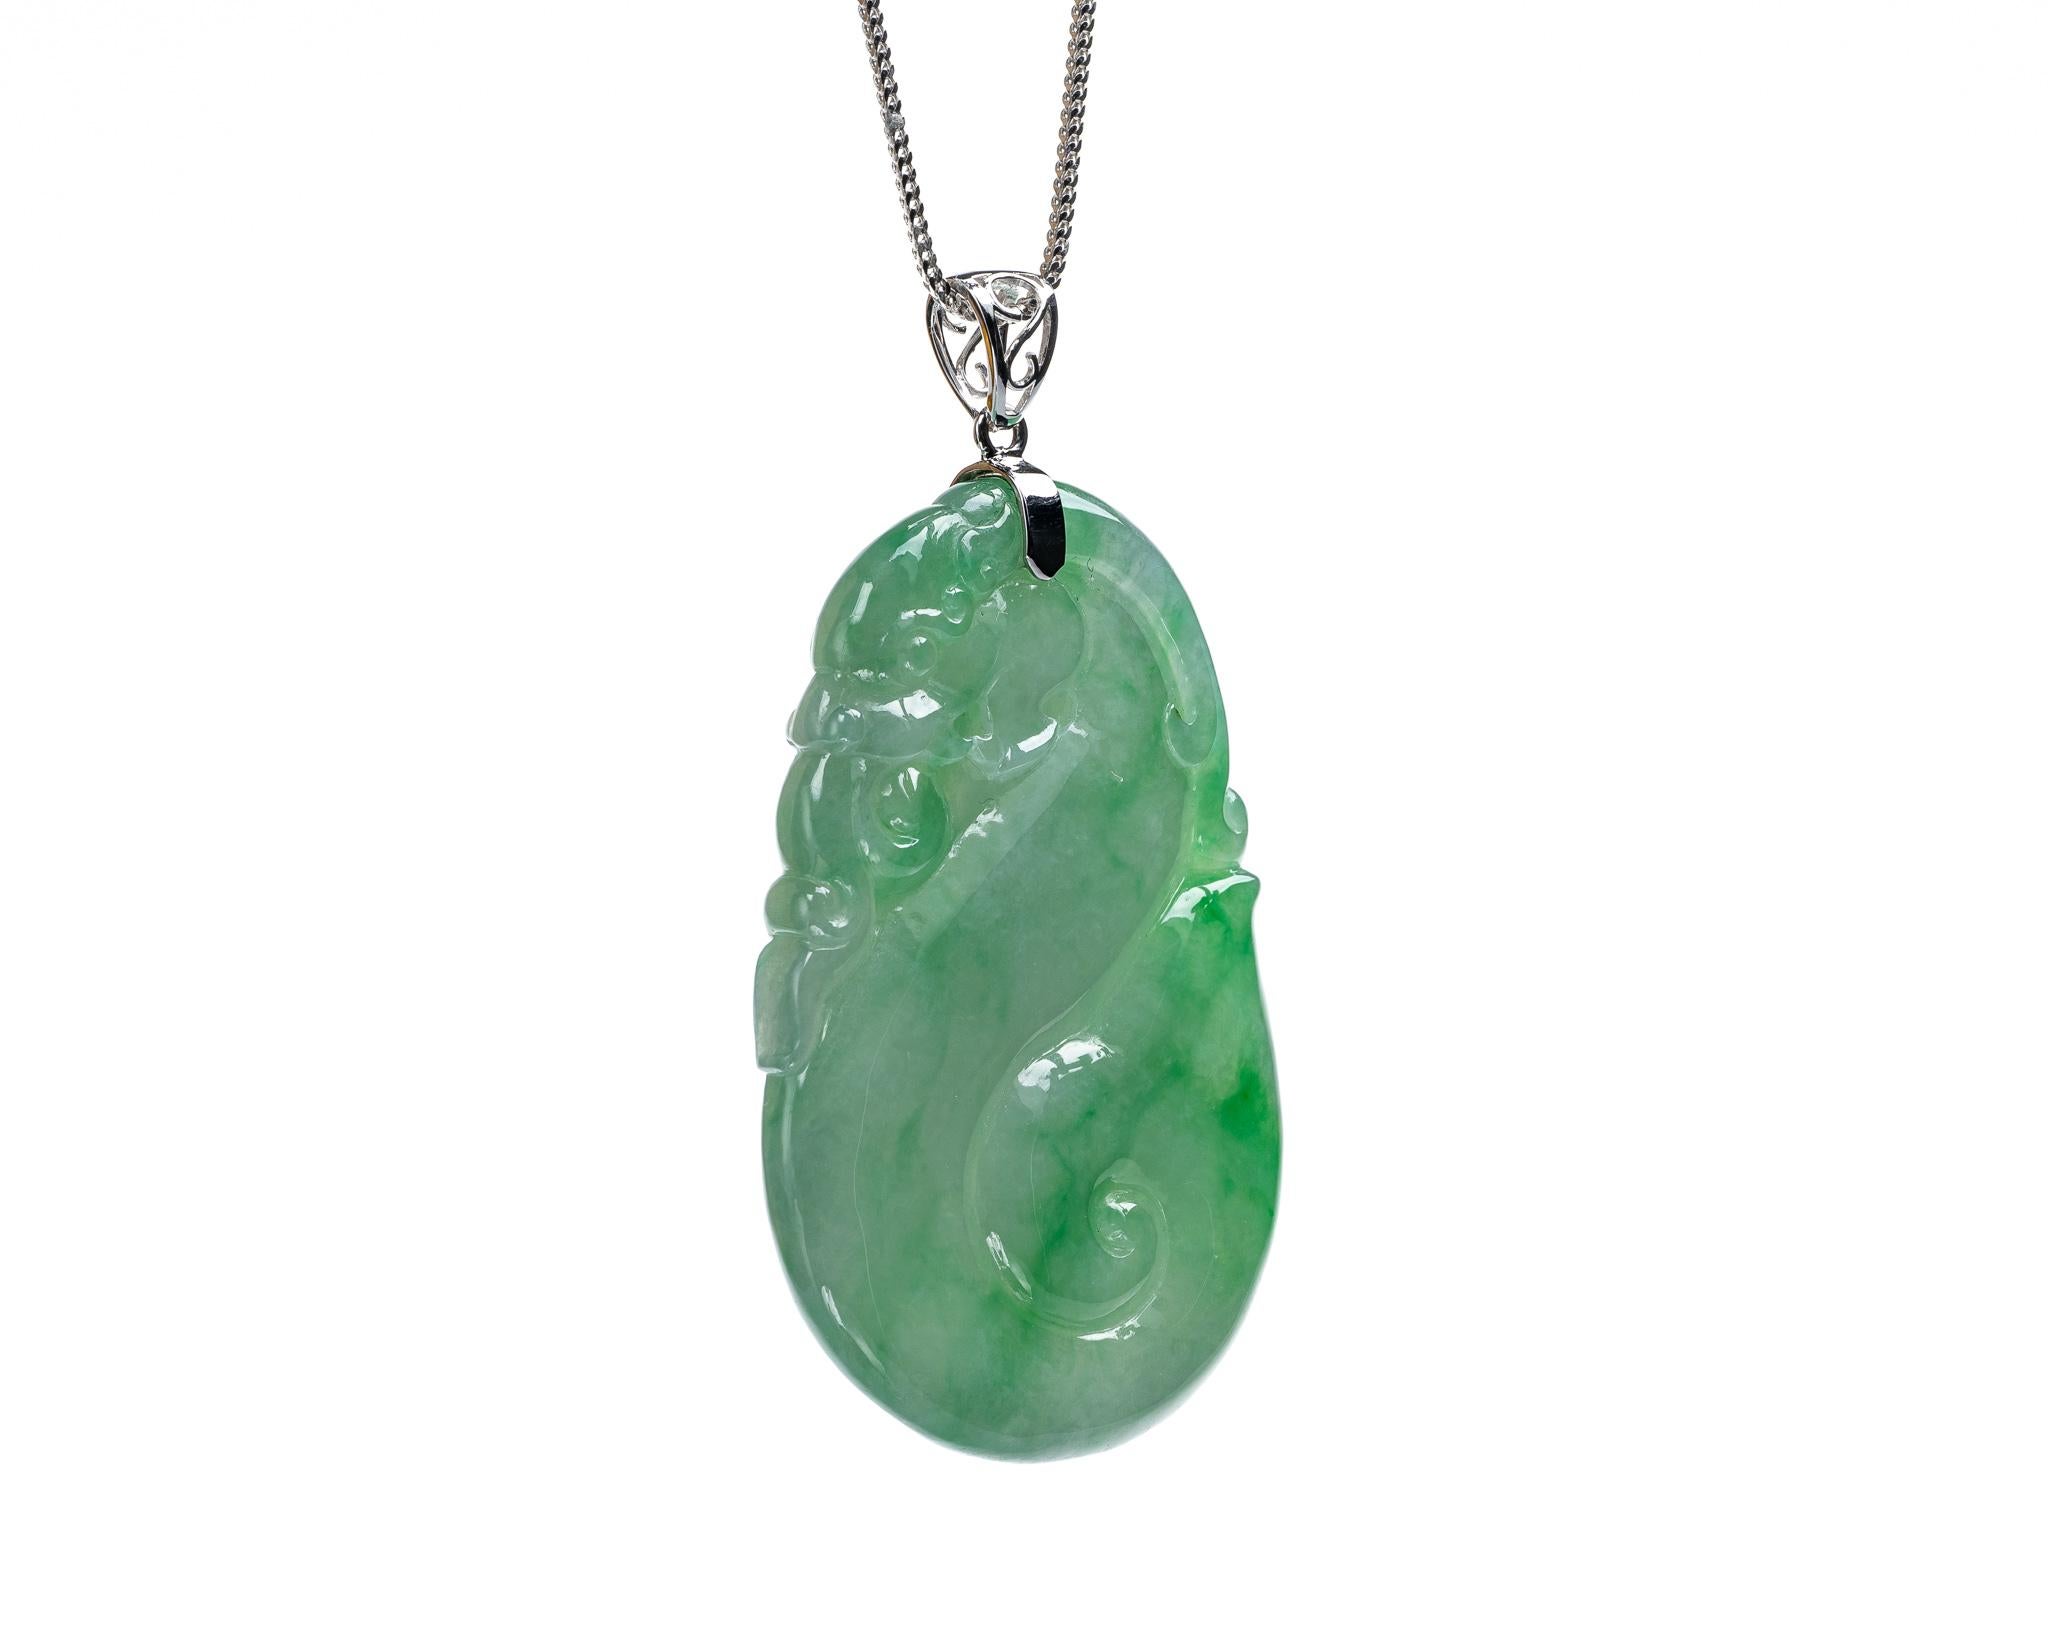 green jade necklace meaning